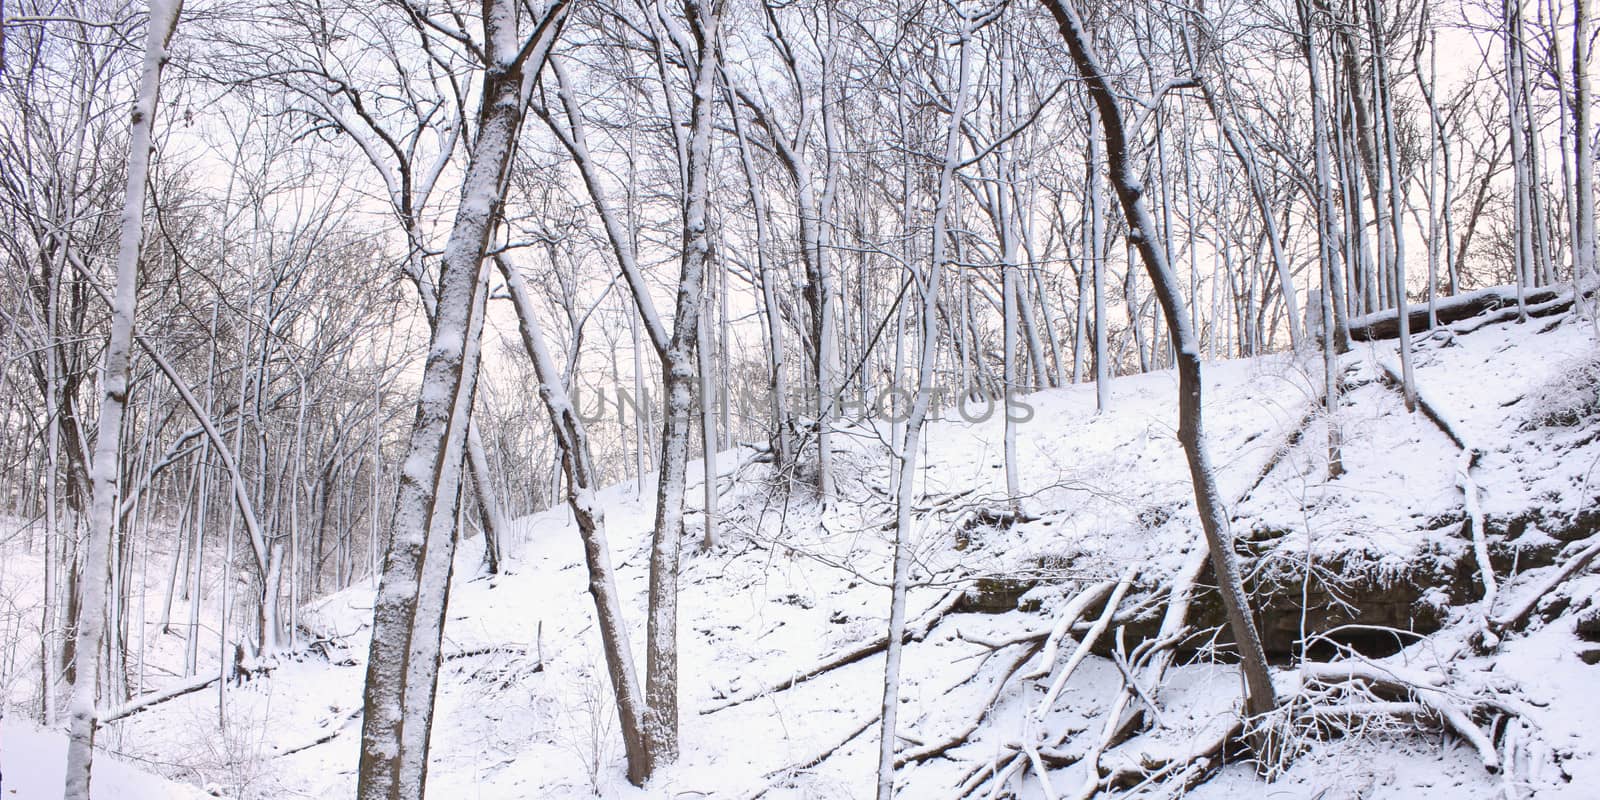 Forest winter wonderland in Rock Cut State Park of Illinois.